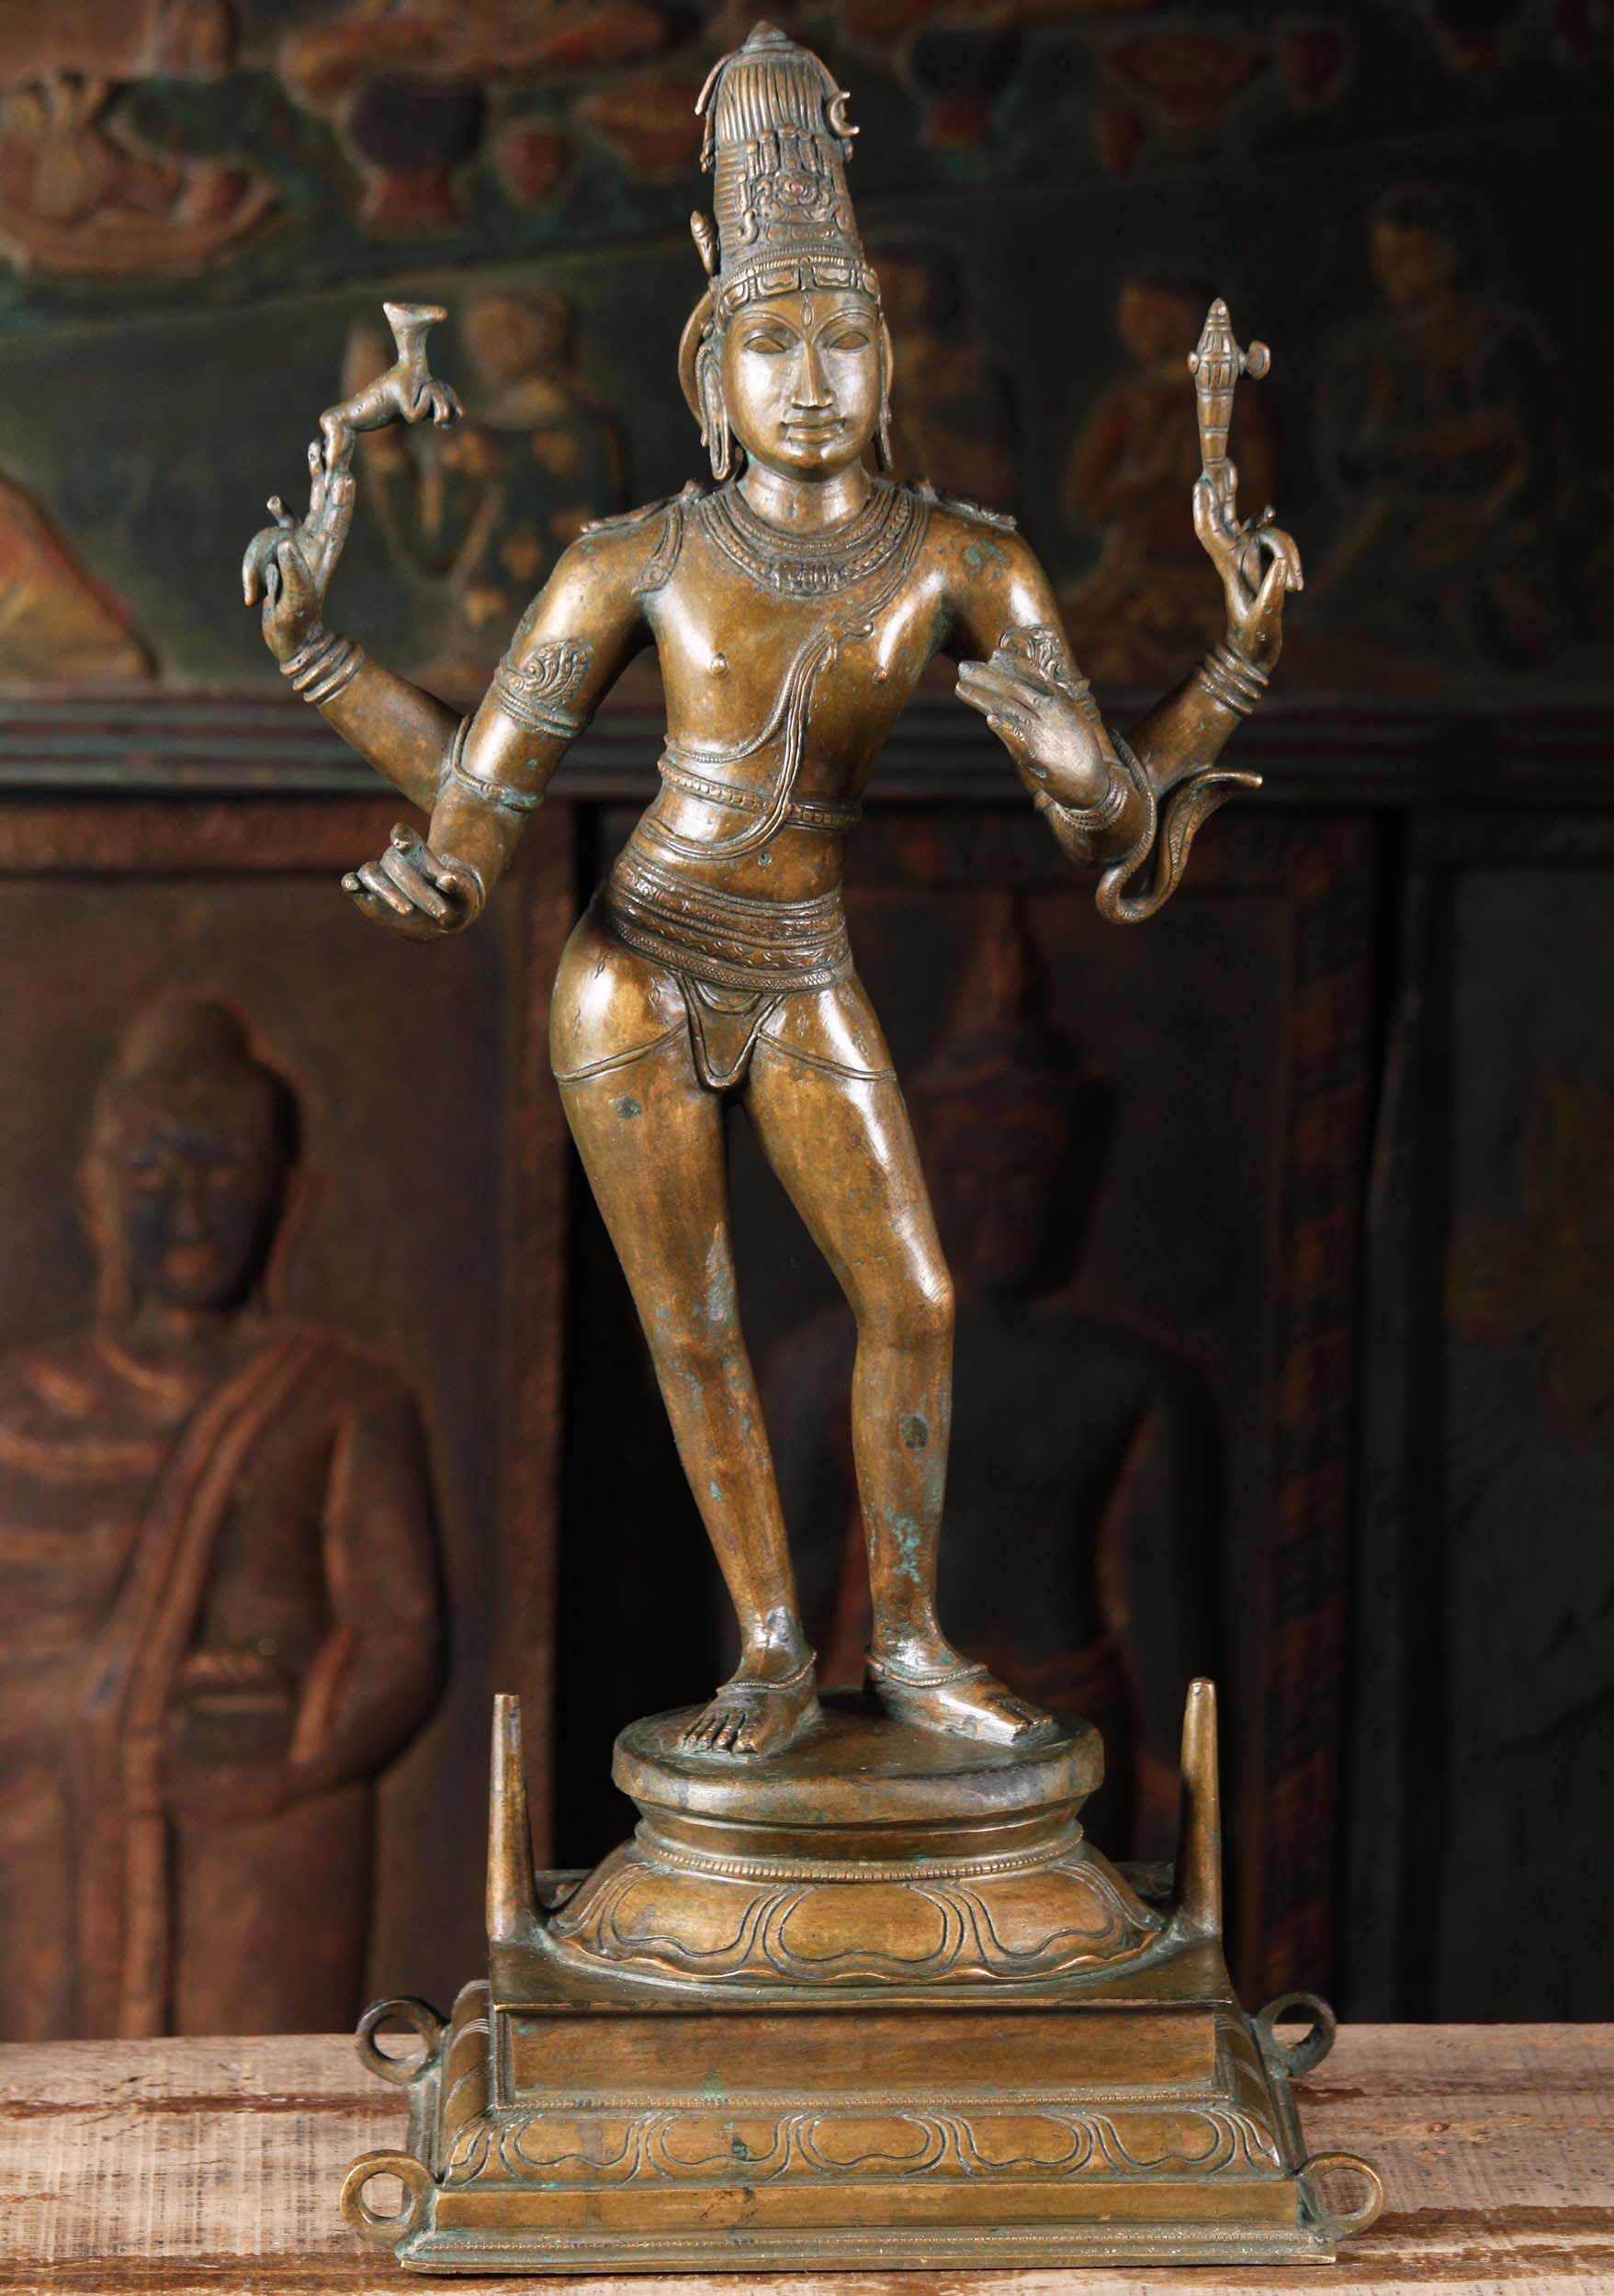 Buy ARTVARKO Brass Standing Shiva Idol Statue God Bholenath Shiva Lord  Shanker Idol Showpiece for Pooja Home Office Temple Art Decor 18 Inch.  Online at Low Prices in India - Amazon.in